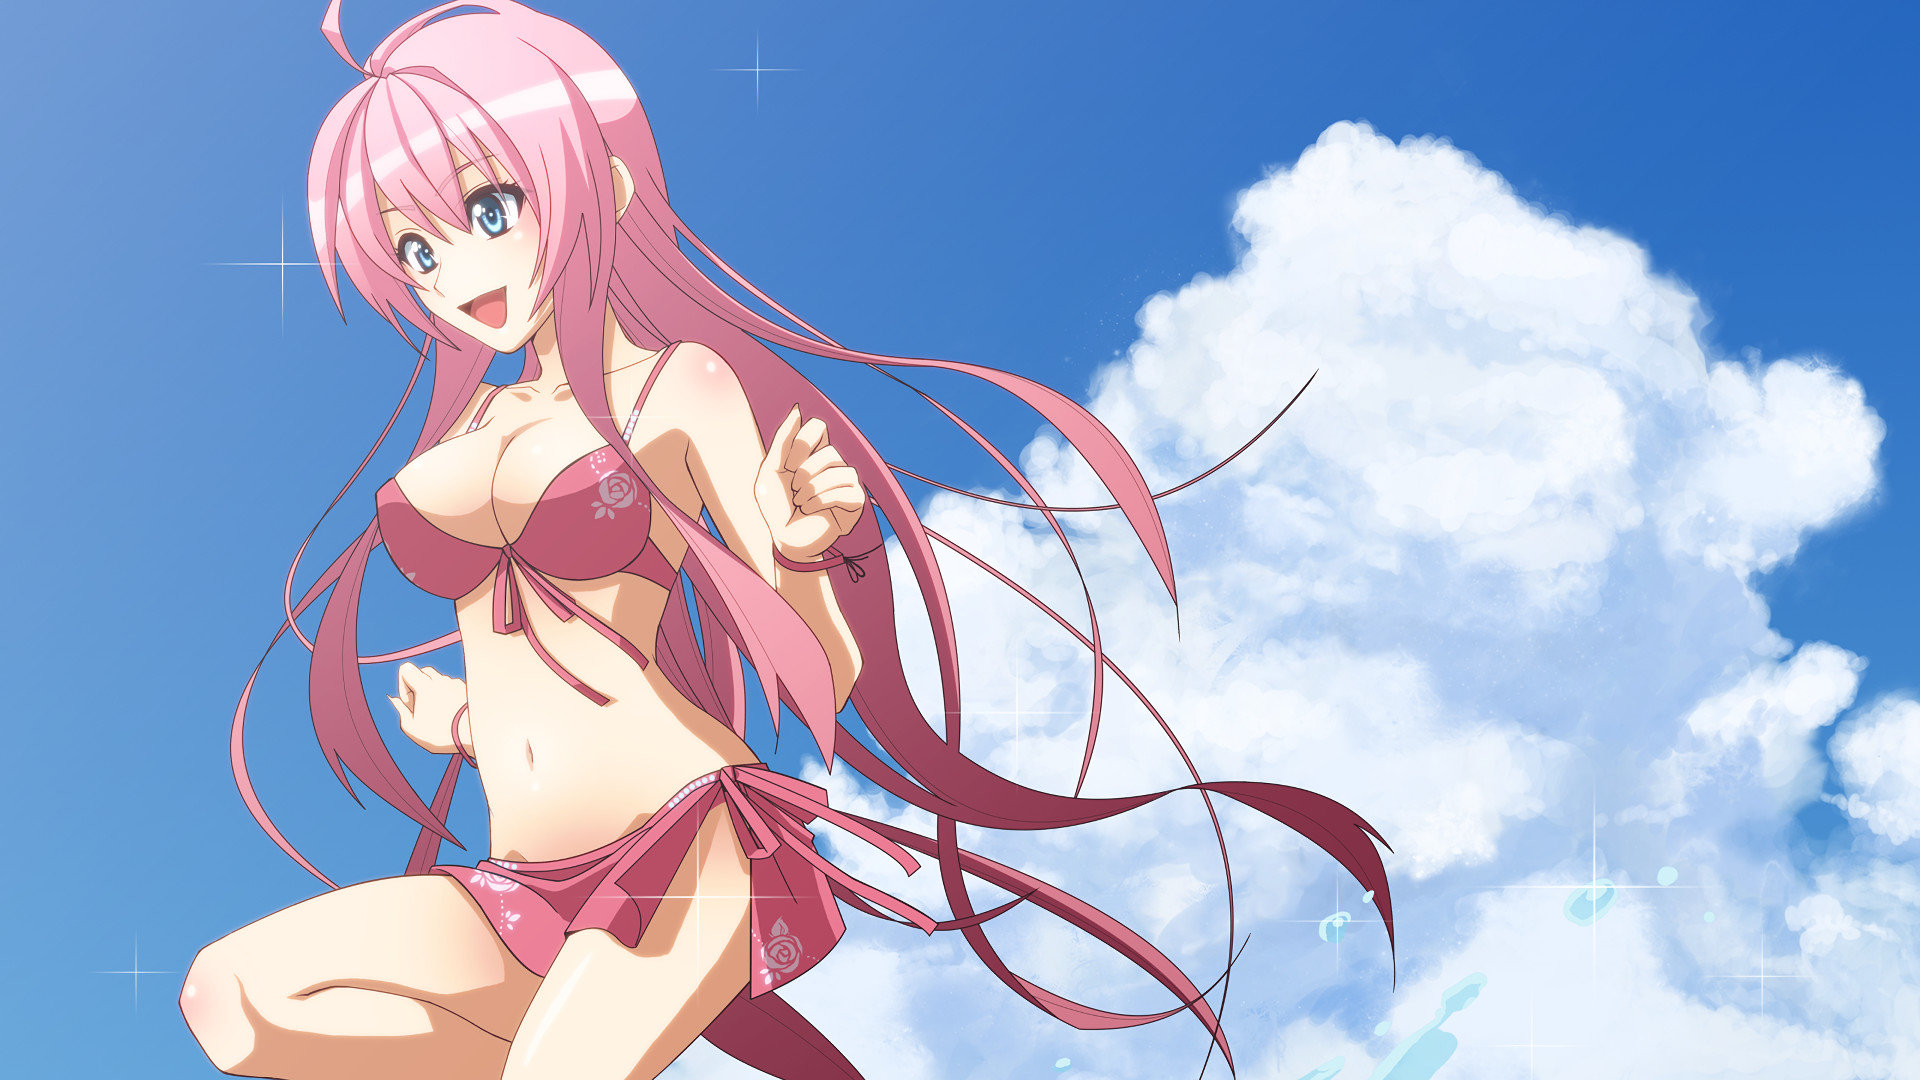 Download full hd 1920x1080 Luka Megurine PC background ID:1434 for free